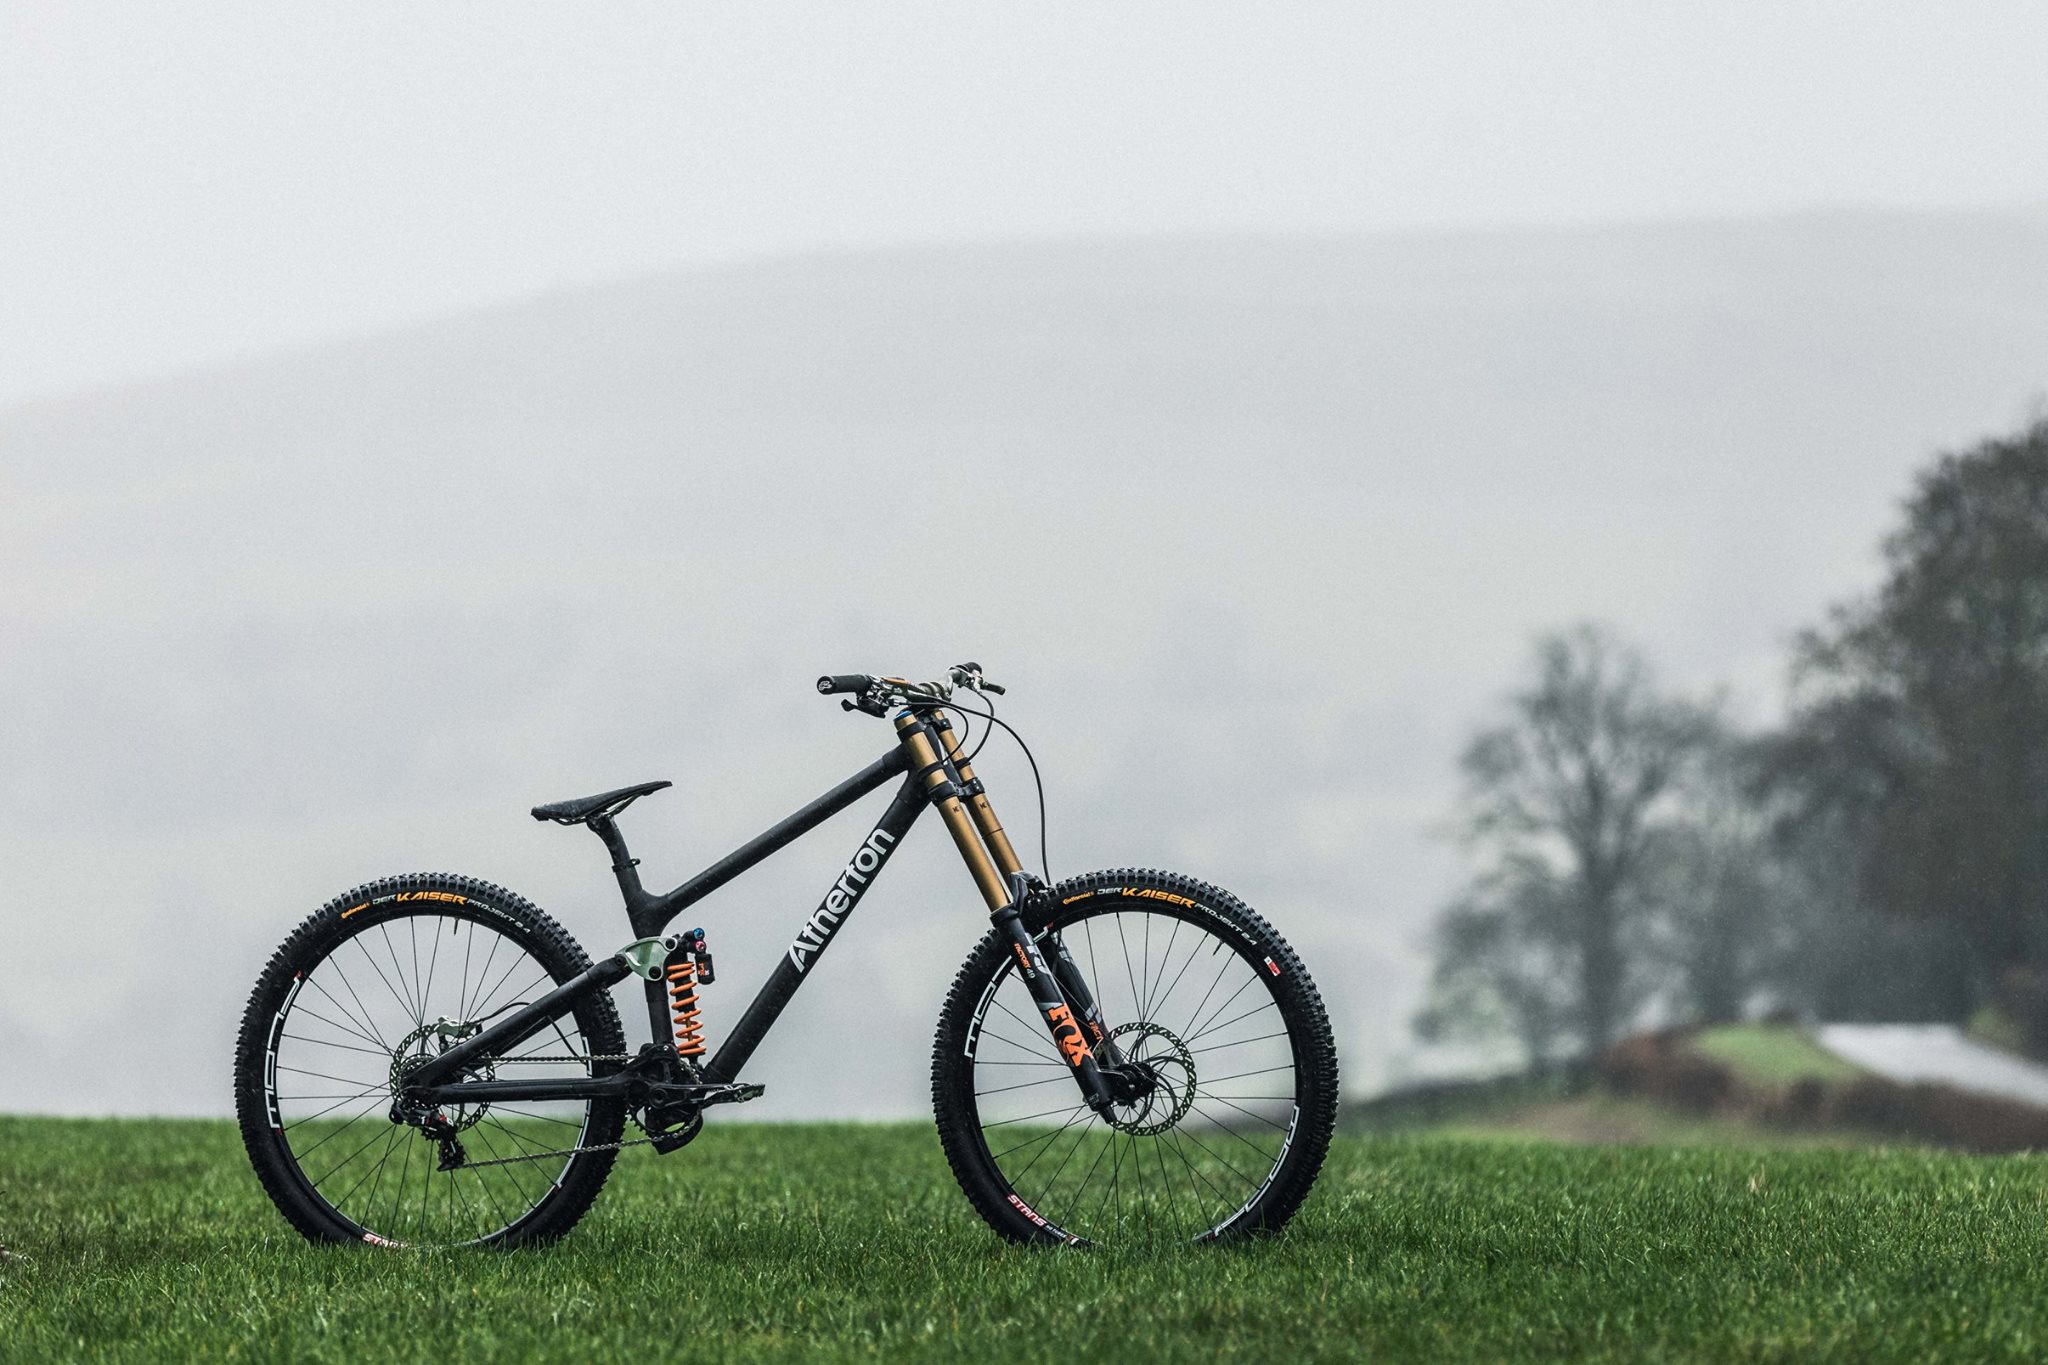 The Athertons provide a closer look at their prototype DH bike w/ 3D printed lugs